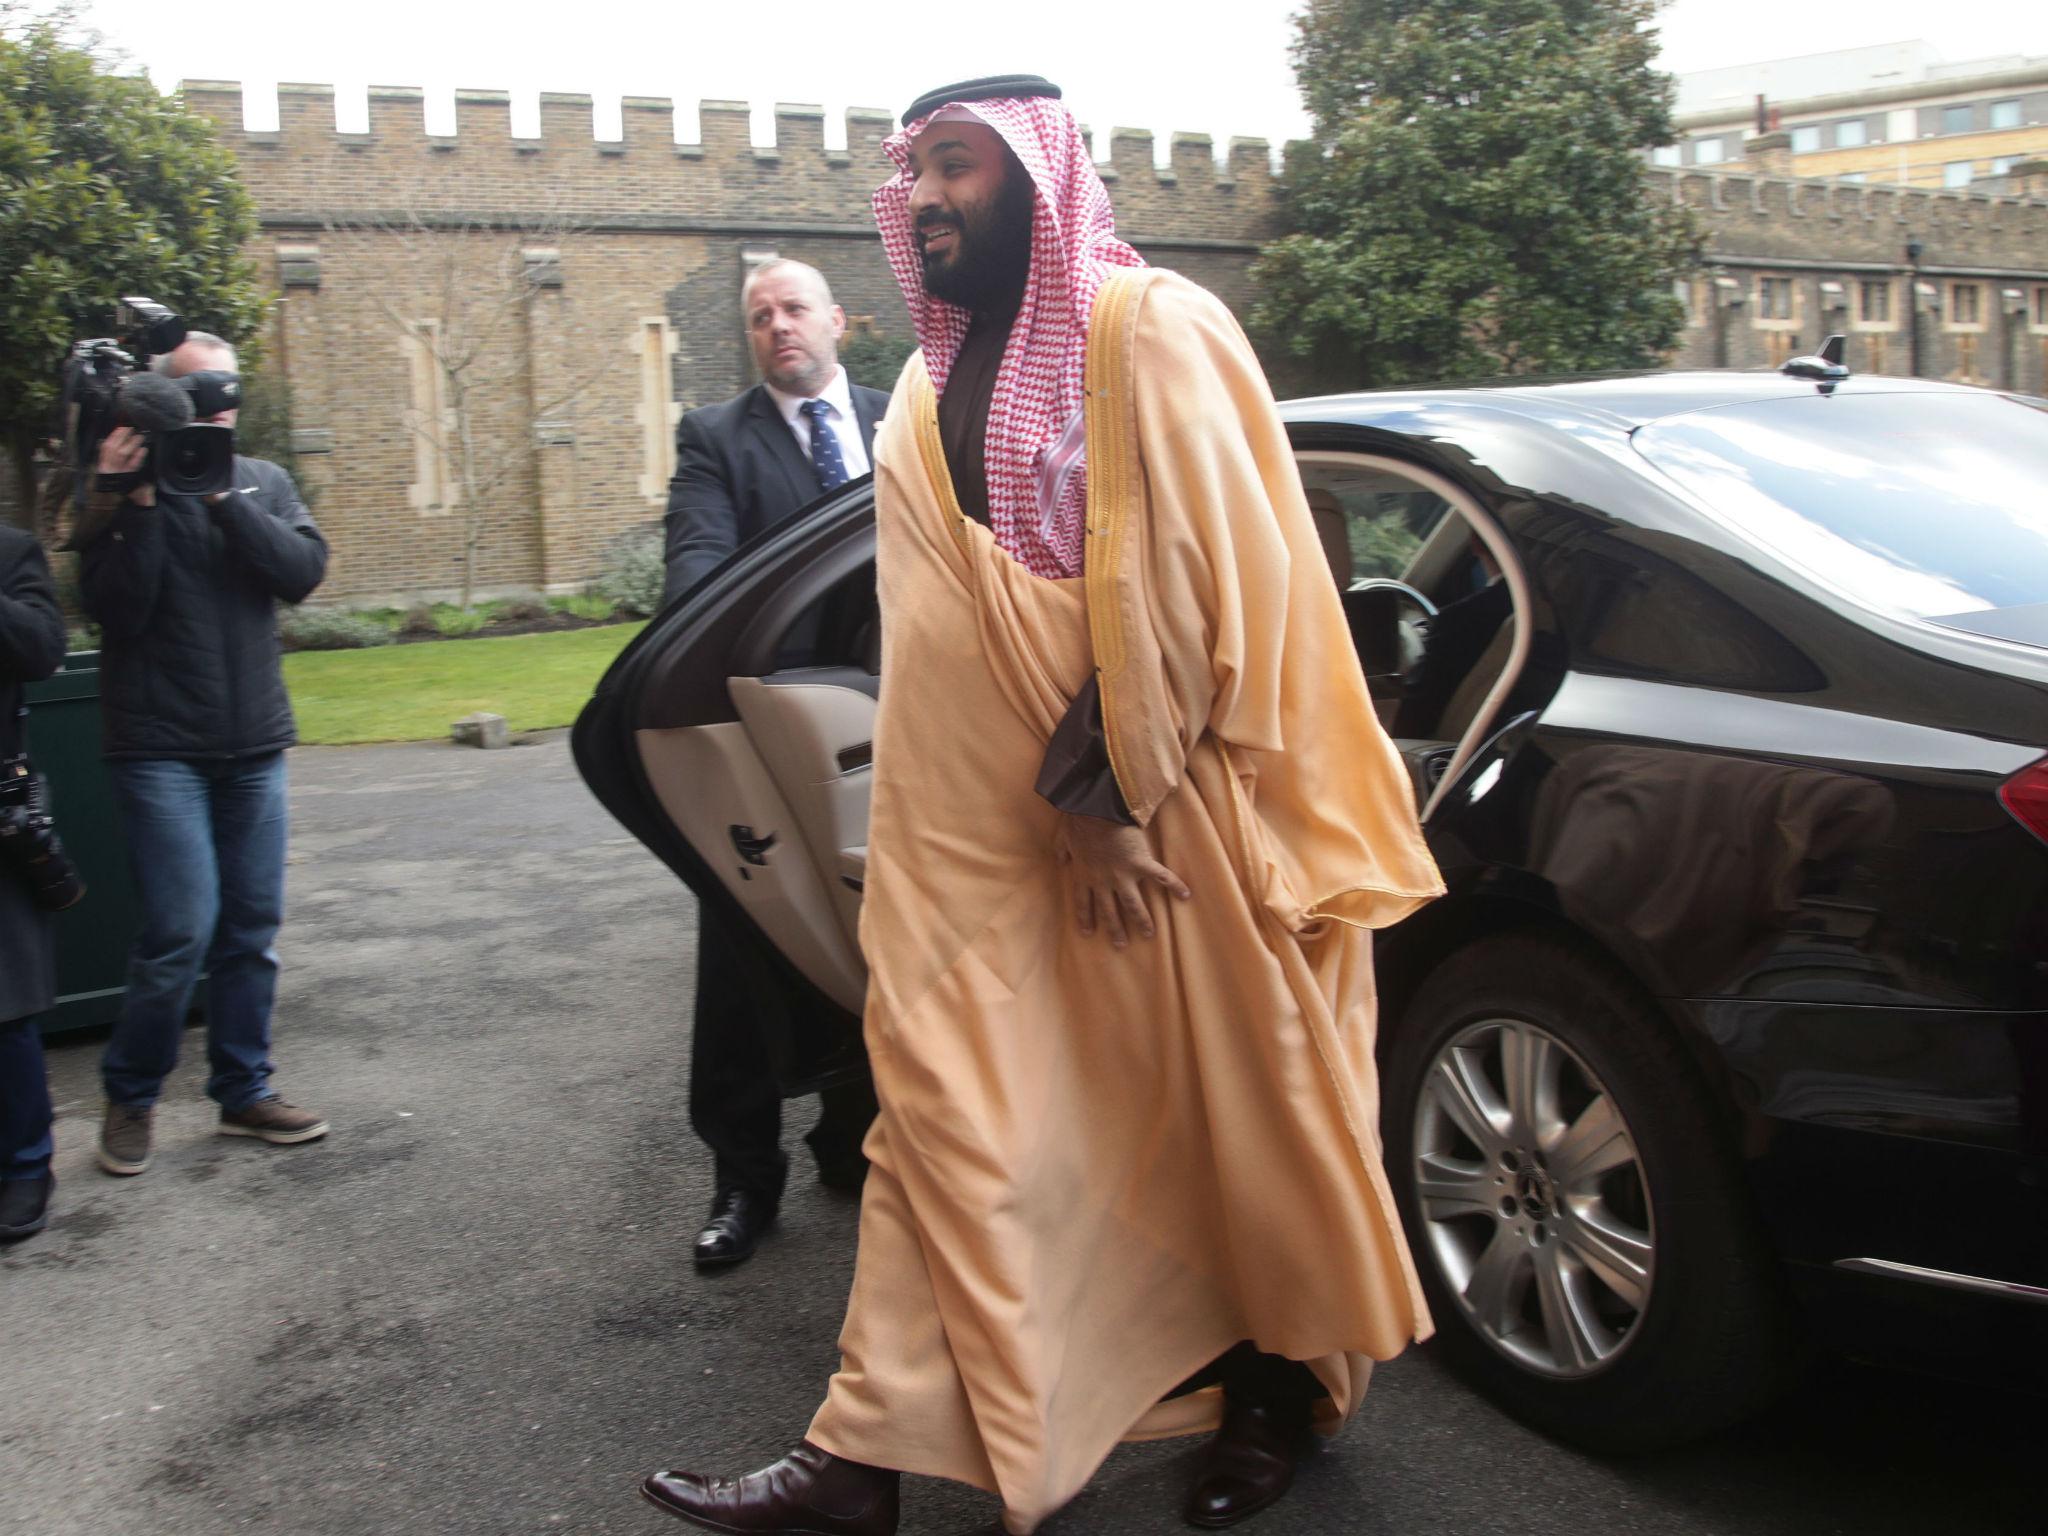 Saudi Arabia's Crown Prince Mohammad bin Salman arrives for a private meeting at Lambeth Palace hosted by the Archbishop of Canterbury Justin Welby